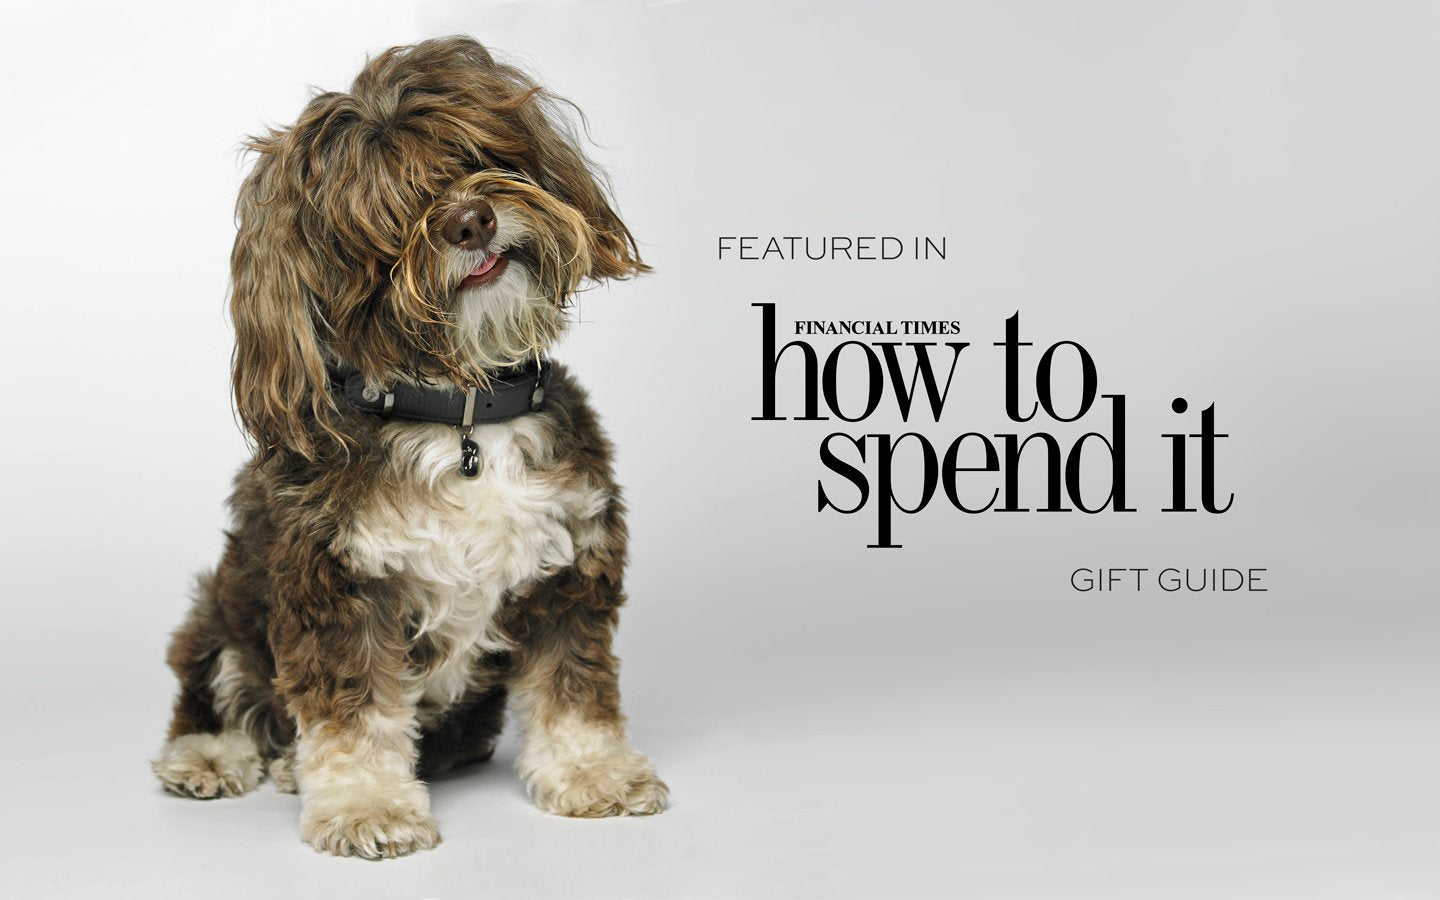 Pantofola featured in Financial Times' How To Spend It Gift Guide